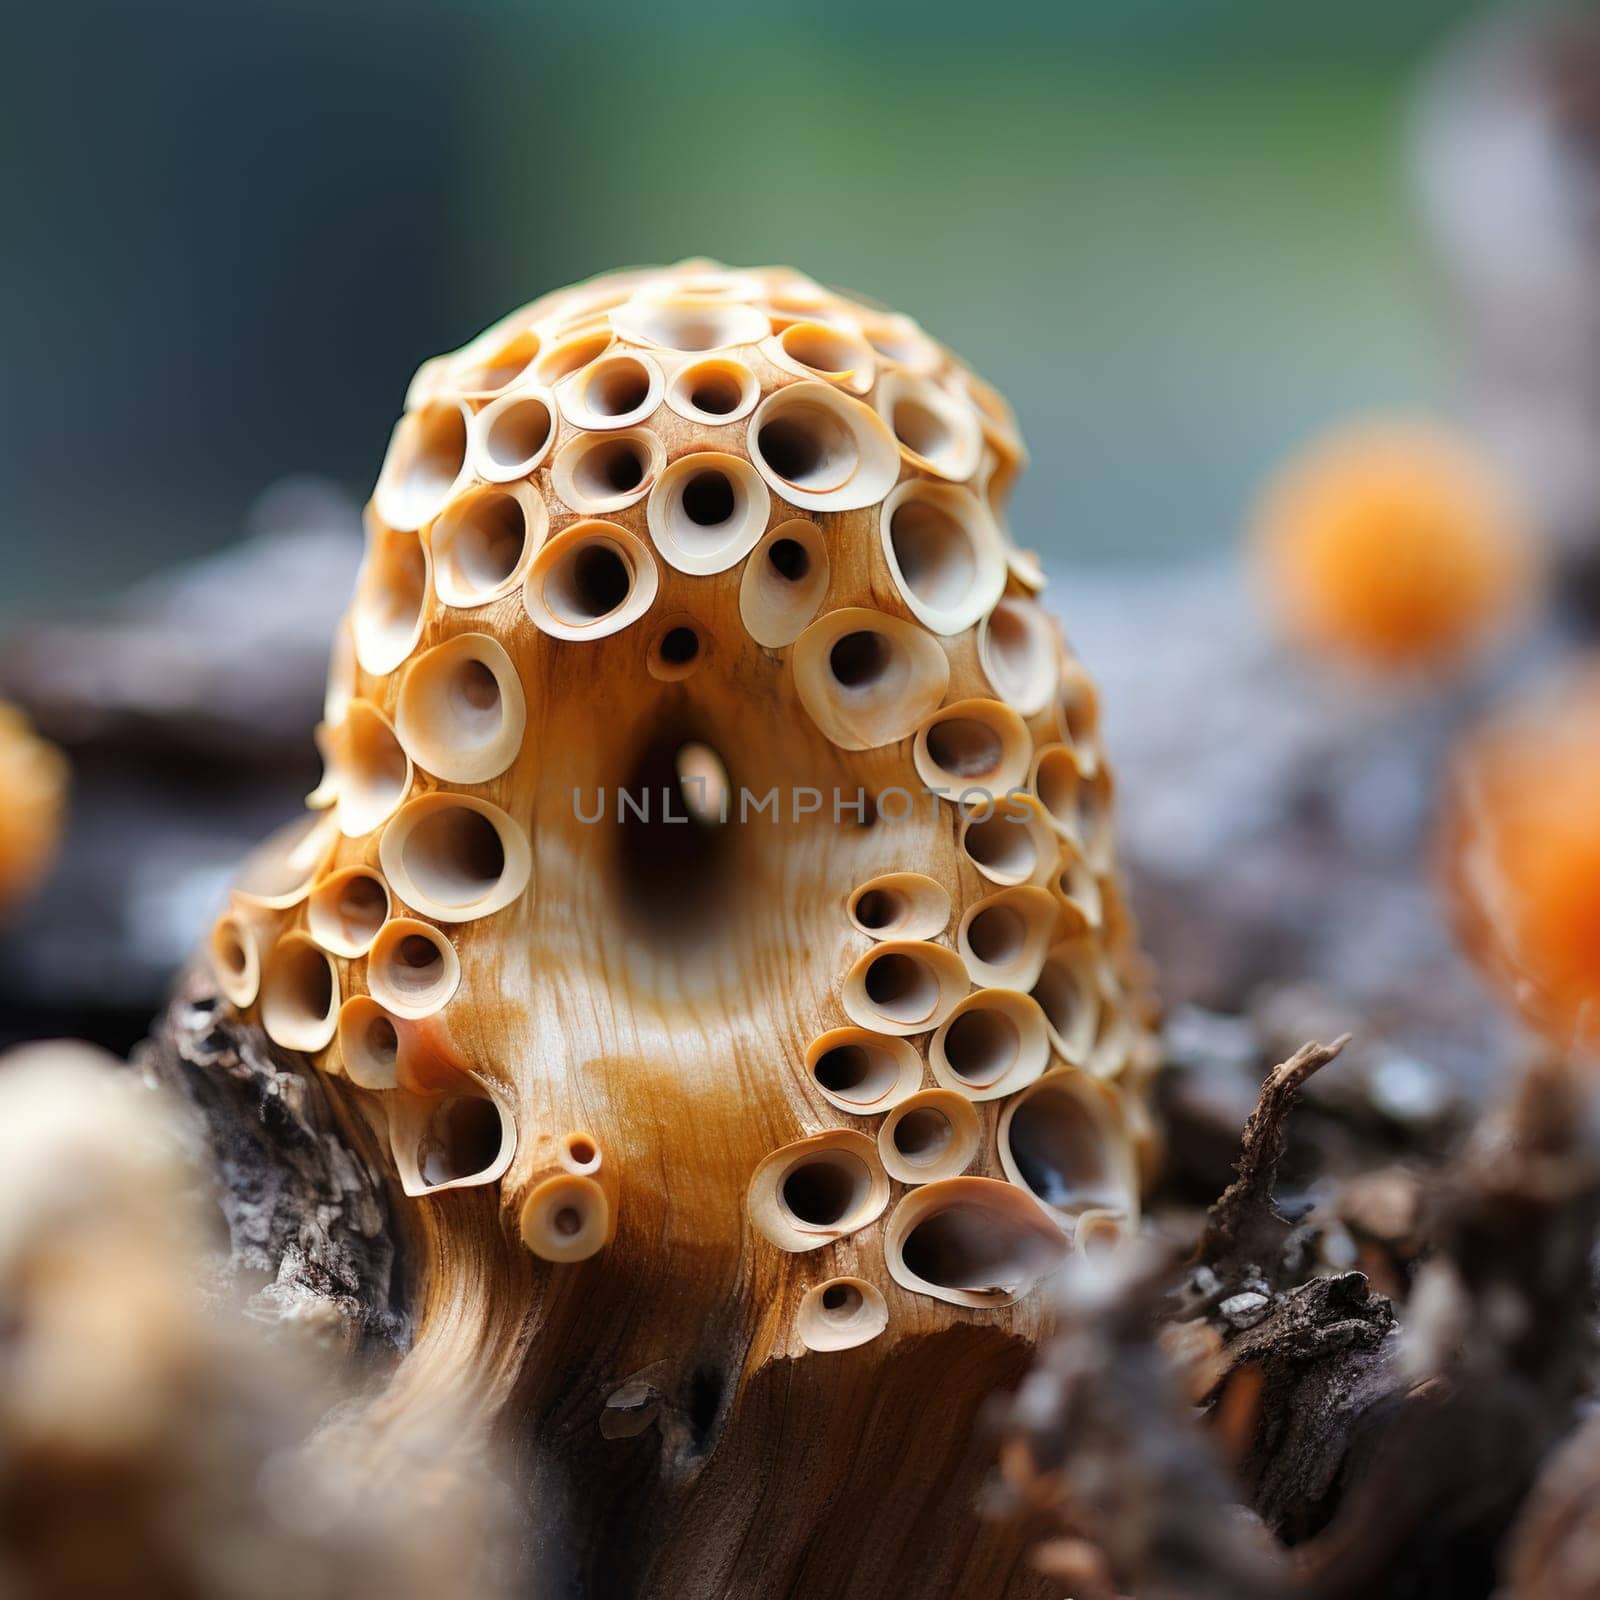 A close up of a mushroom with holes